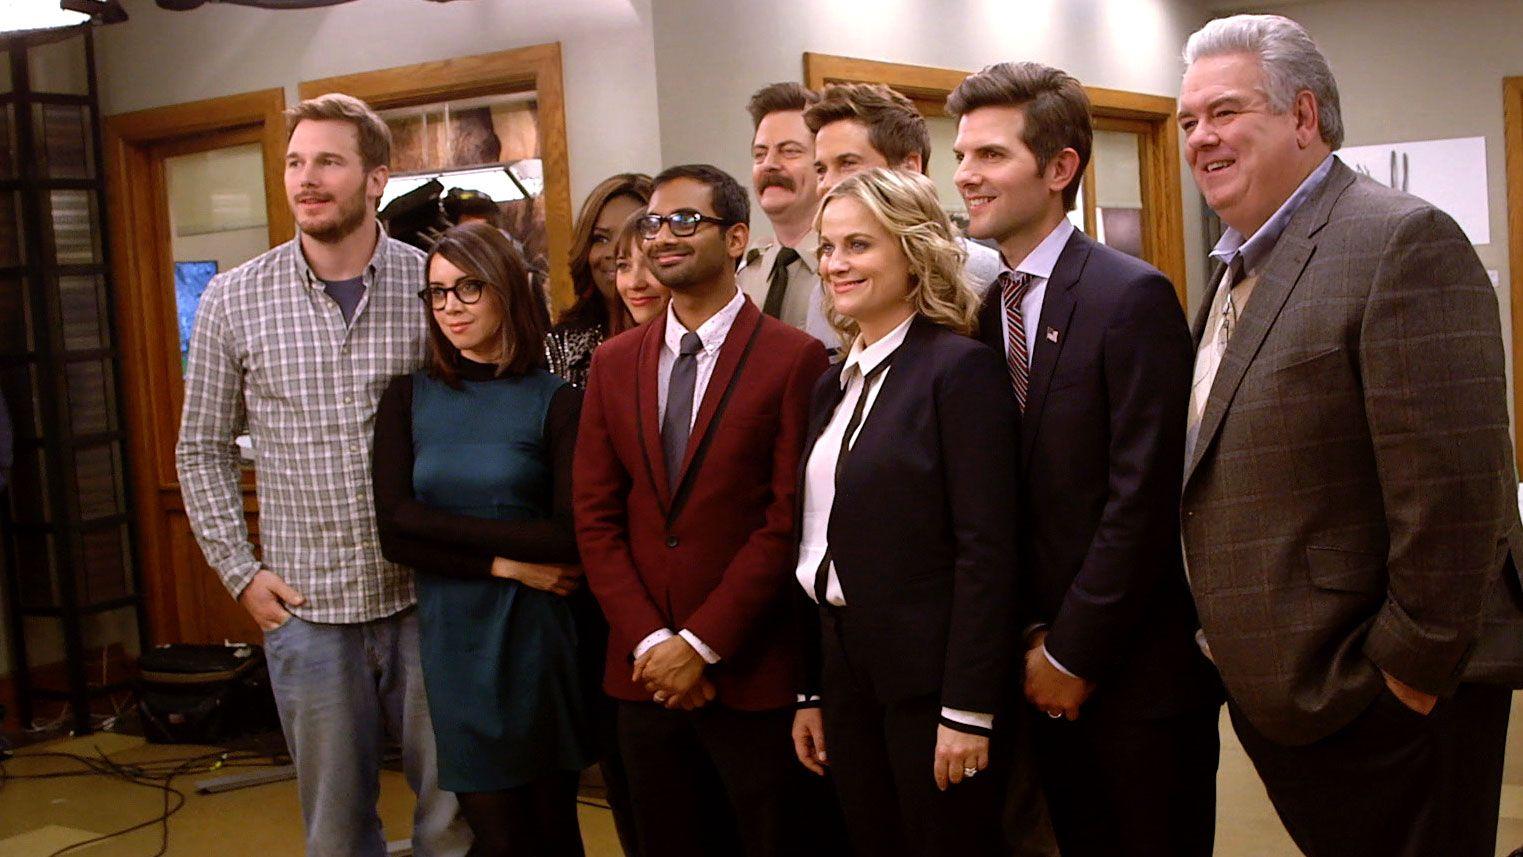 1920x1080px Parks And Recreation 634.75 KB